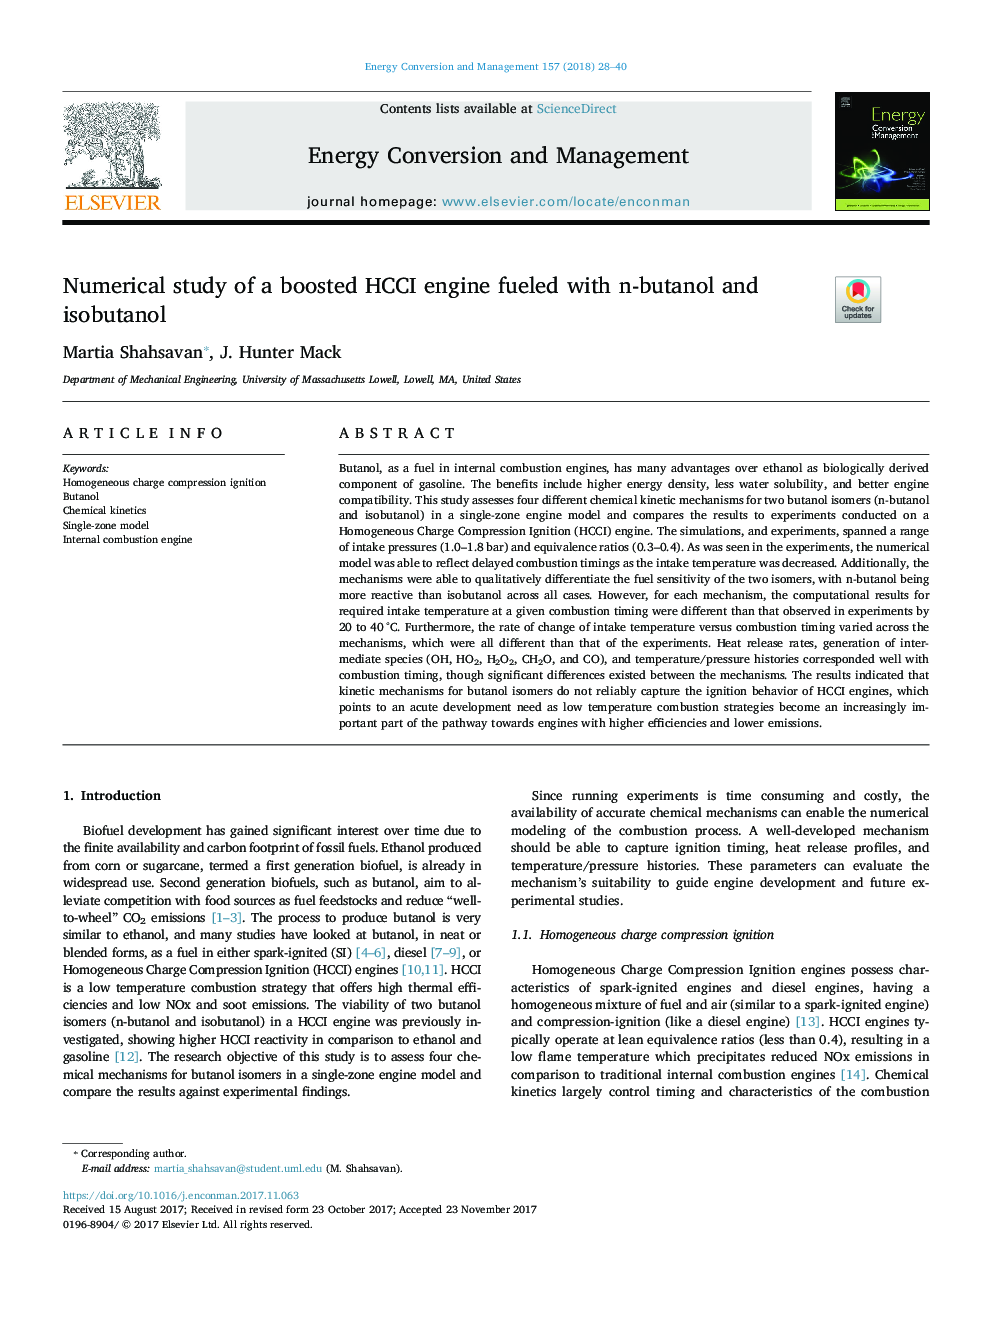 Numerical study of a boosted HCCI engine fueled with n-butanol and isobutanol